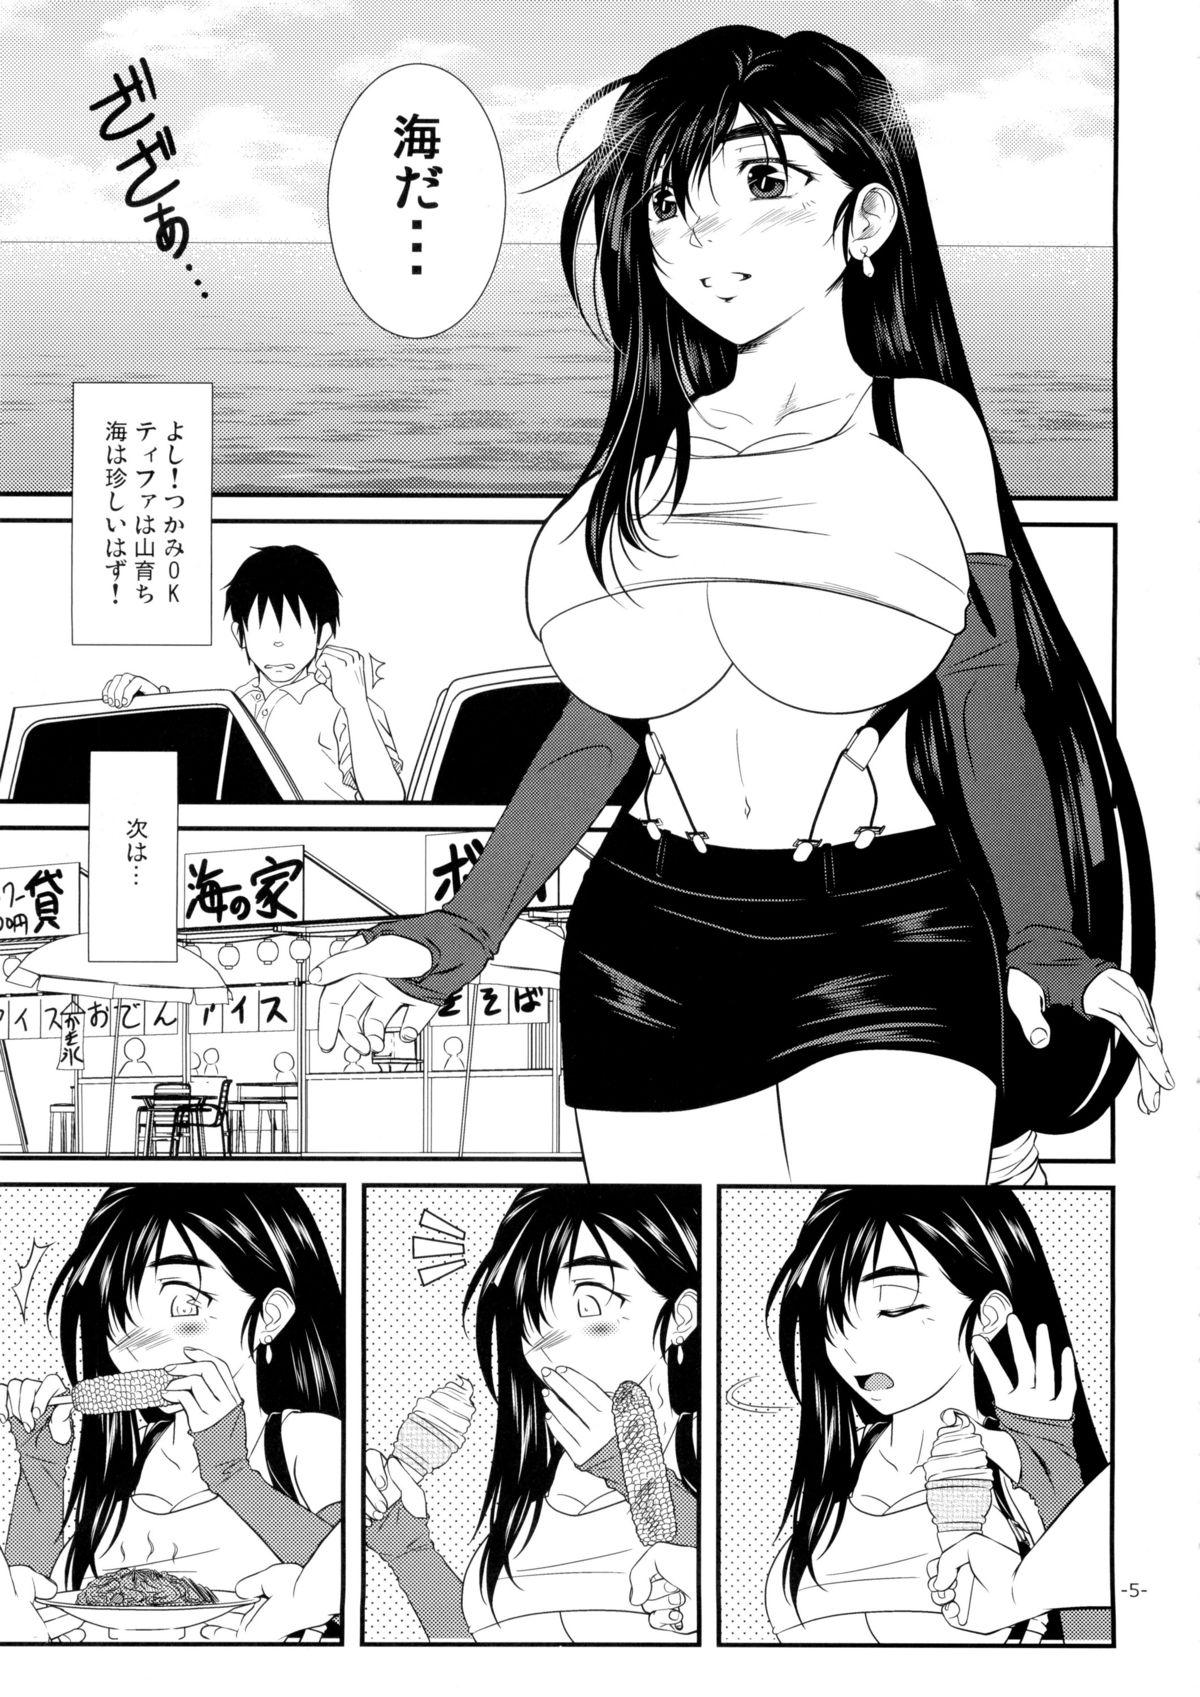 LET'S GO TO THE SEA WITH TIFA 4